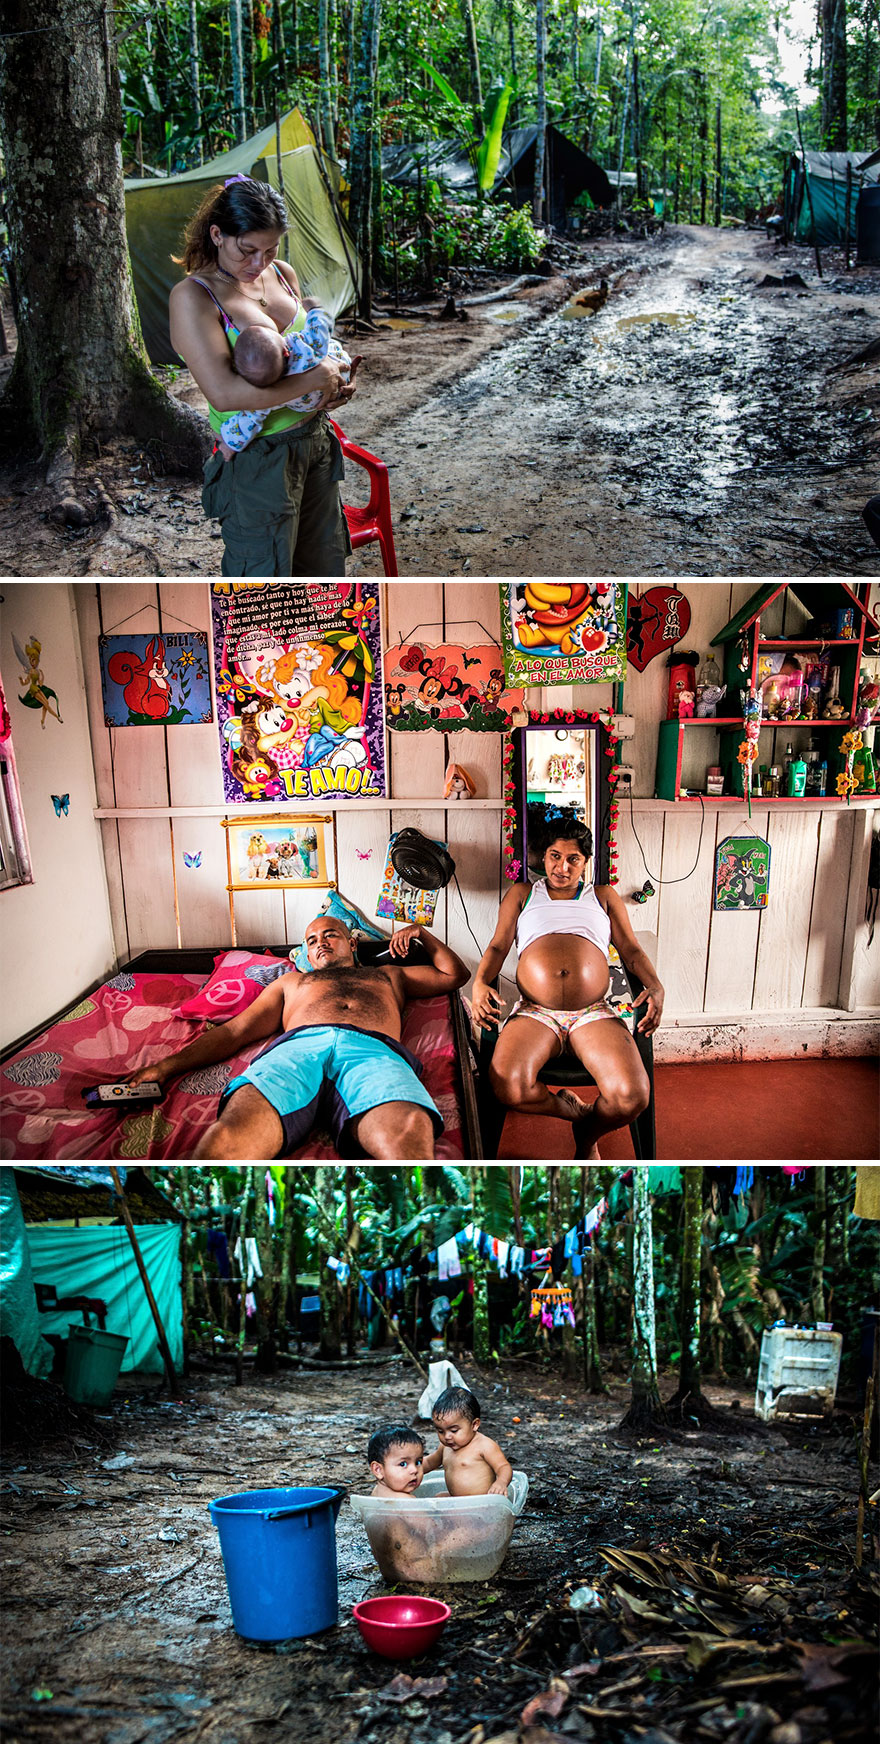 Contemporary Issues, Stories, 2nd Prize, "Colombia, (Re)birth" By Catalina Martin-Chico